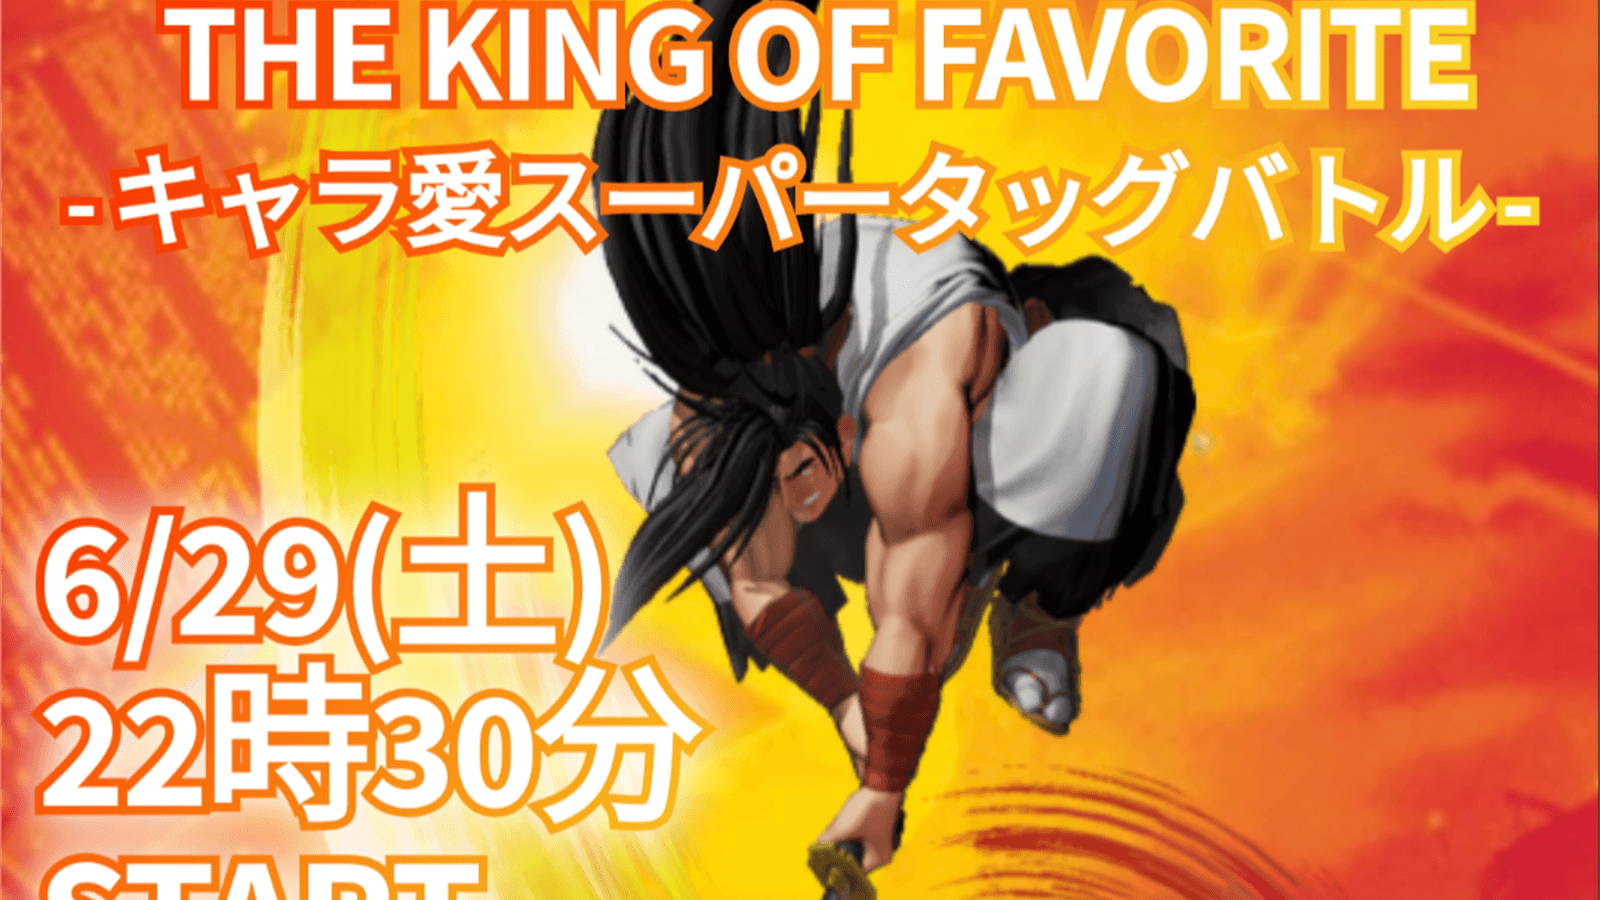 THE KING OF FAVORITE -キャラ愛SUPER TAGBATTLE- feature image